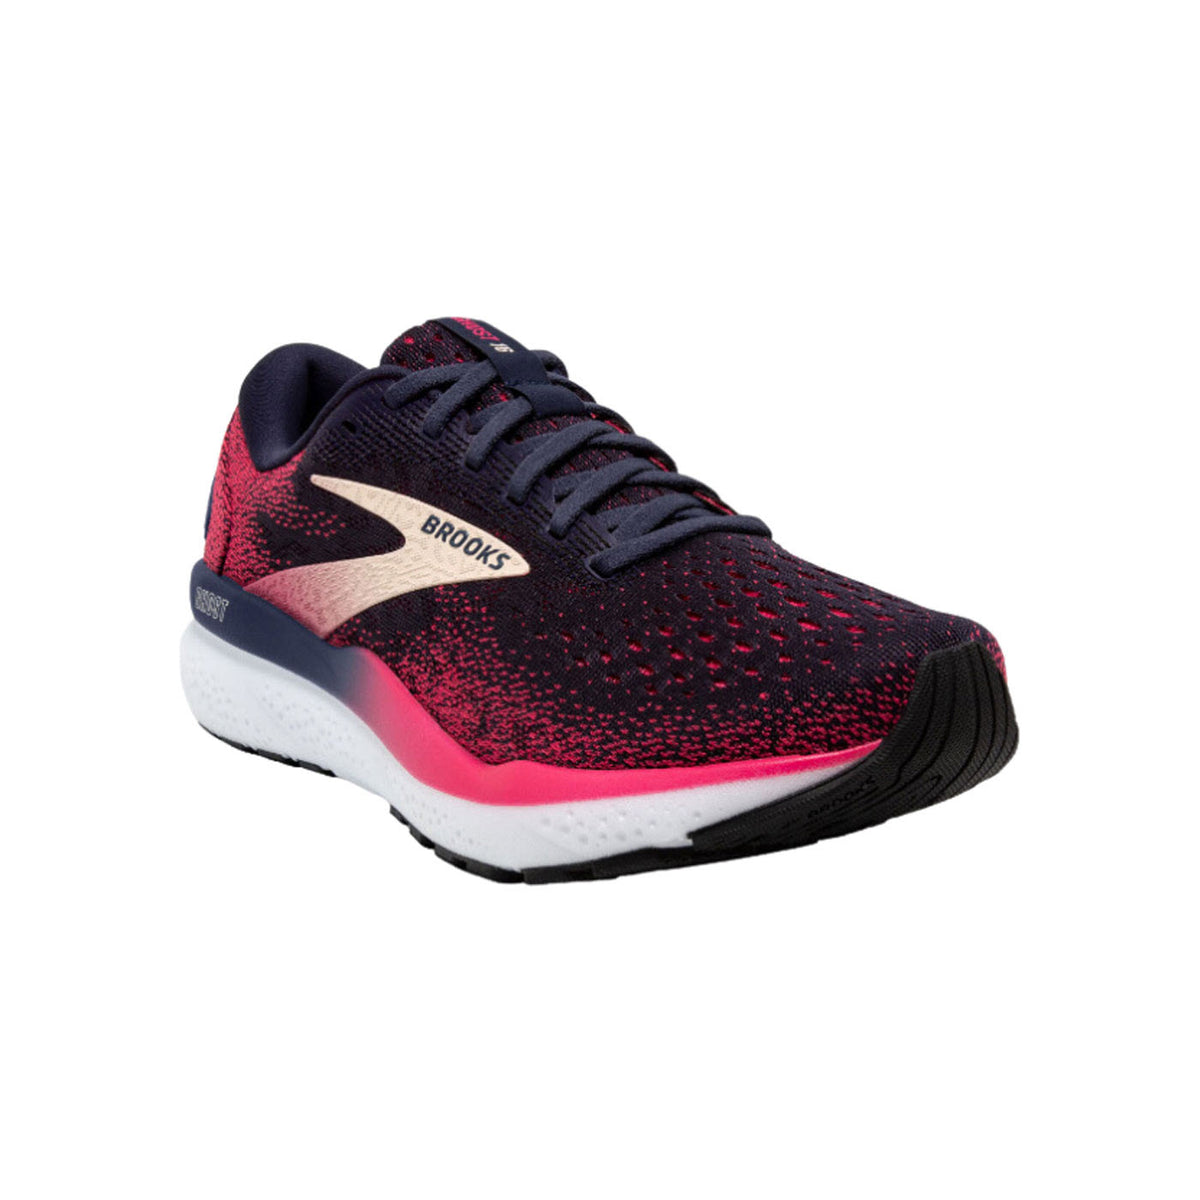 The BROOKS GHOST 16 PEACOAT/RASPBERRY/APRICOT - WOMENS by Brooks, a navy and pink running shoe with improved cushioning and a white sole, delivers exceptional comfort for your run.